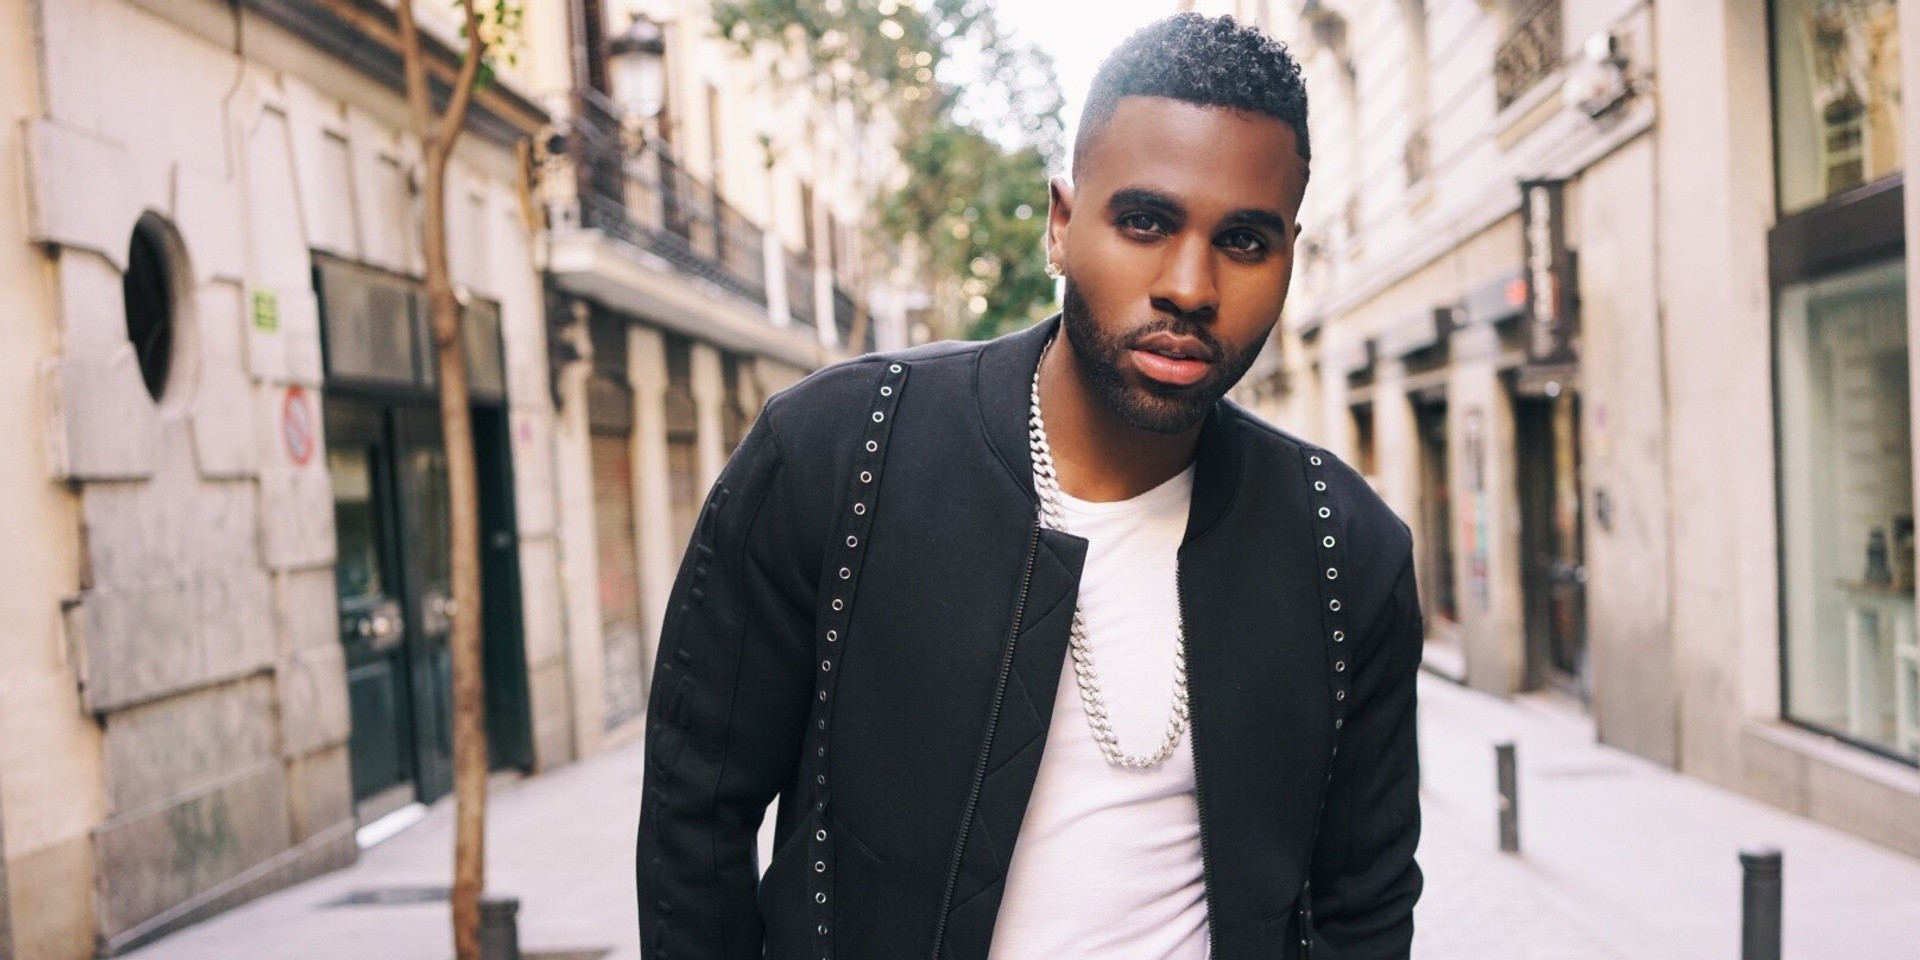 Jason Derulo releases 'Colors', one of the official FIFA World Cup 2018 anthems – listen